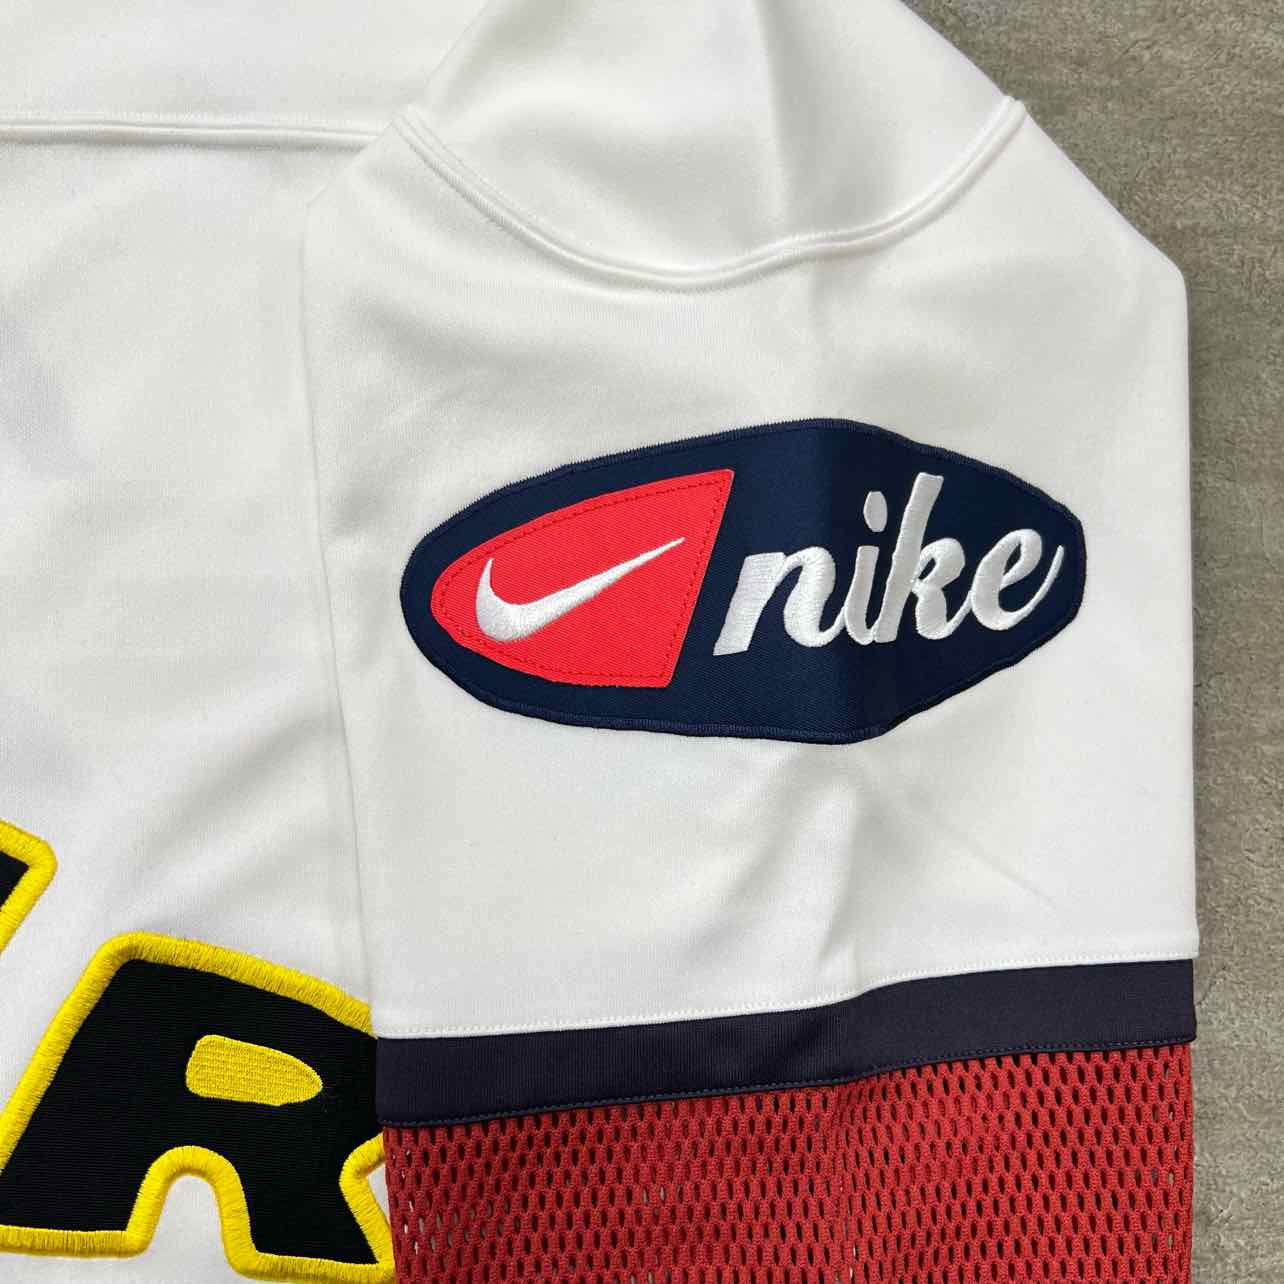 Nike Long Sleeve &quot;CPFM HOCKEY JERSEY&quot; White Used Size S